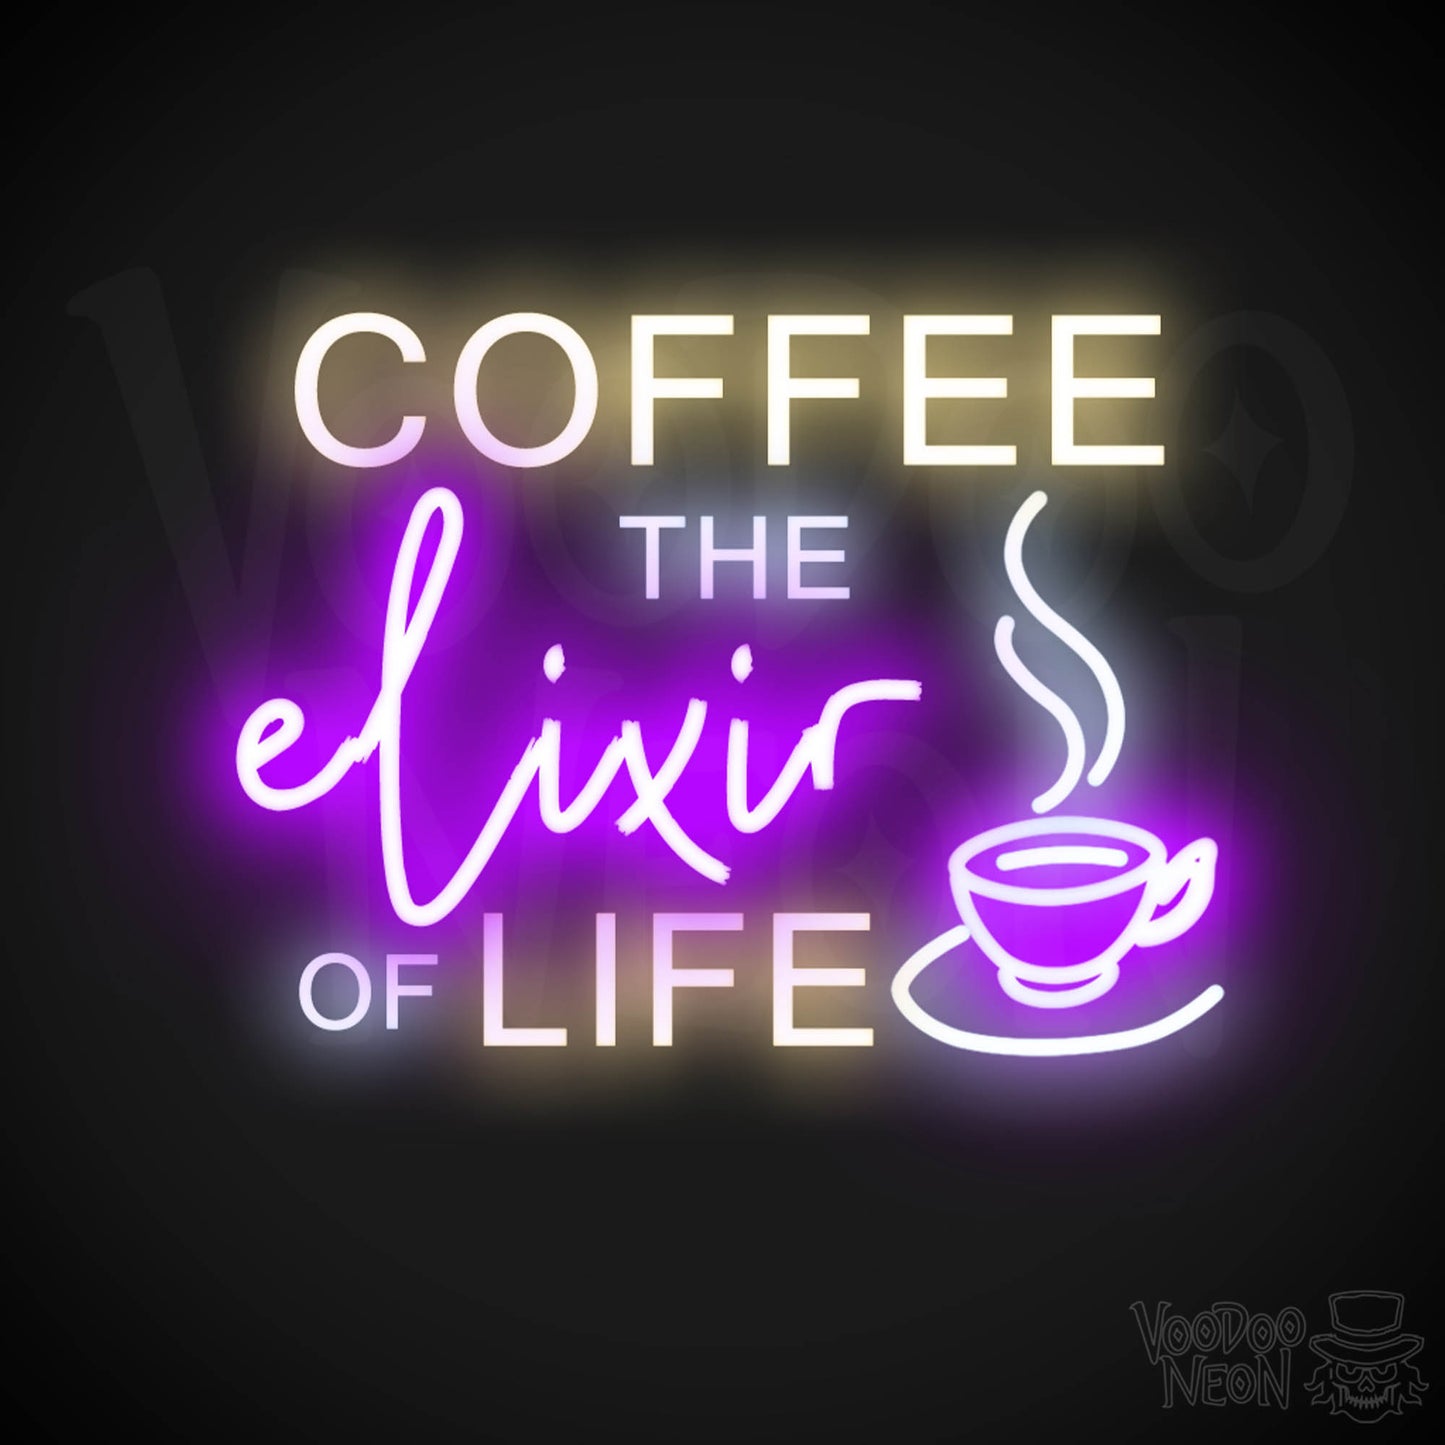 Coffee - The Elixir Of Life Neon Sign - The Elixir Of Life Sign - Color Multi-Color